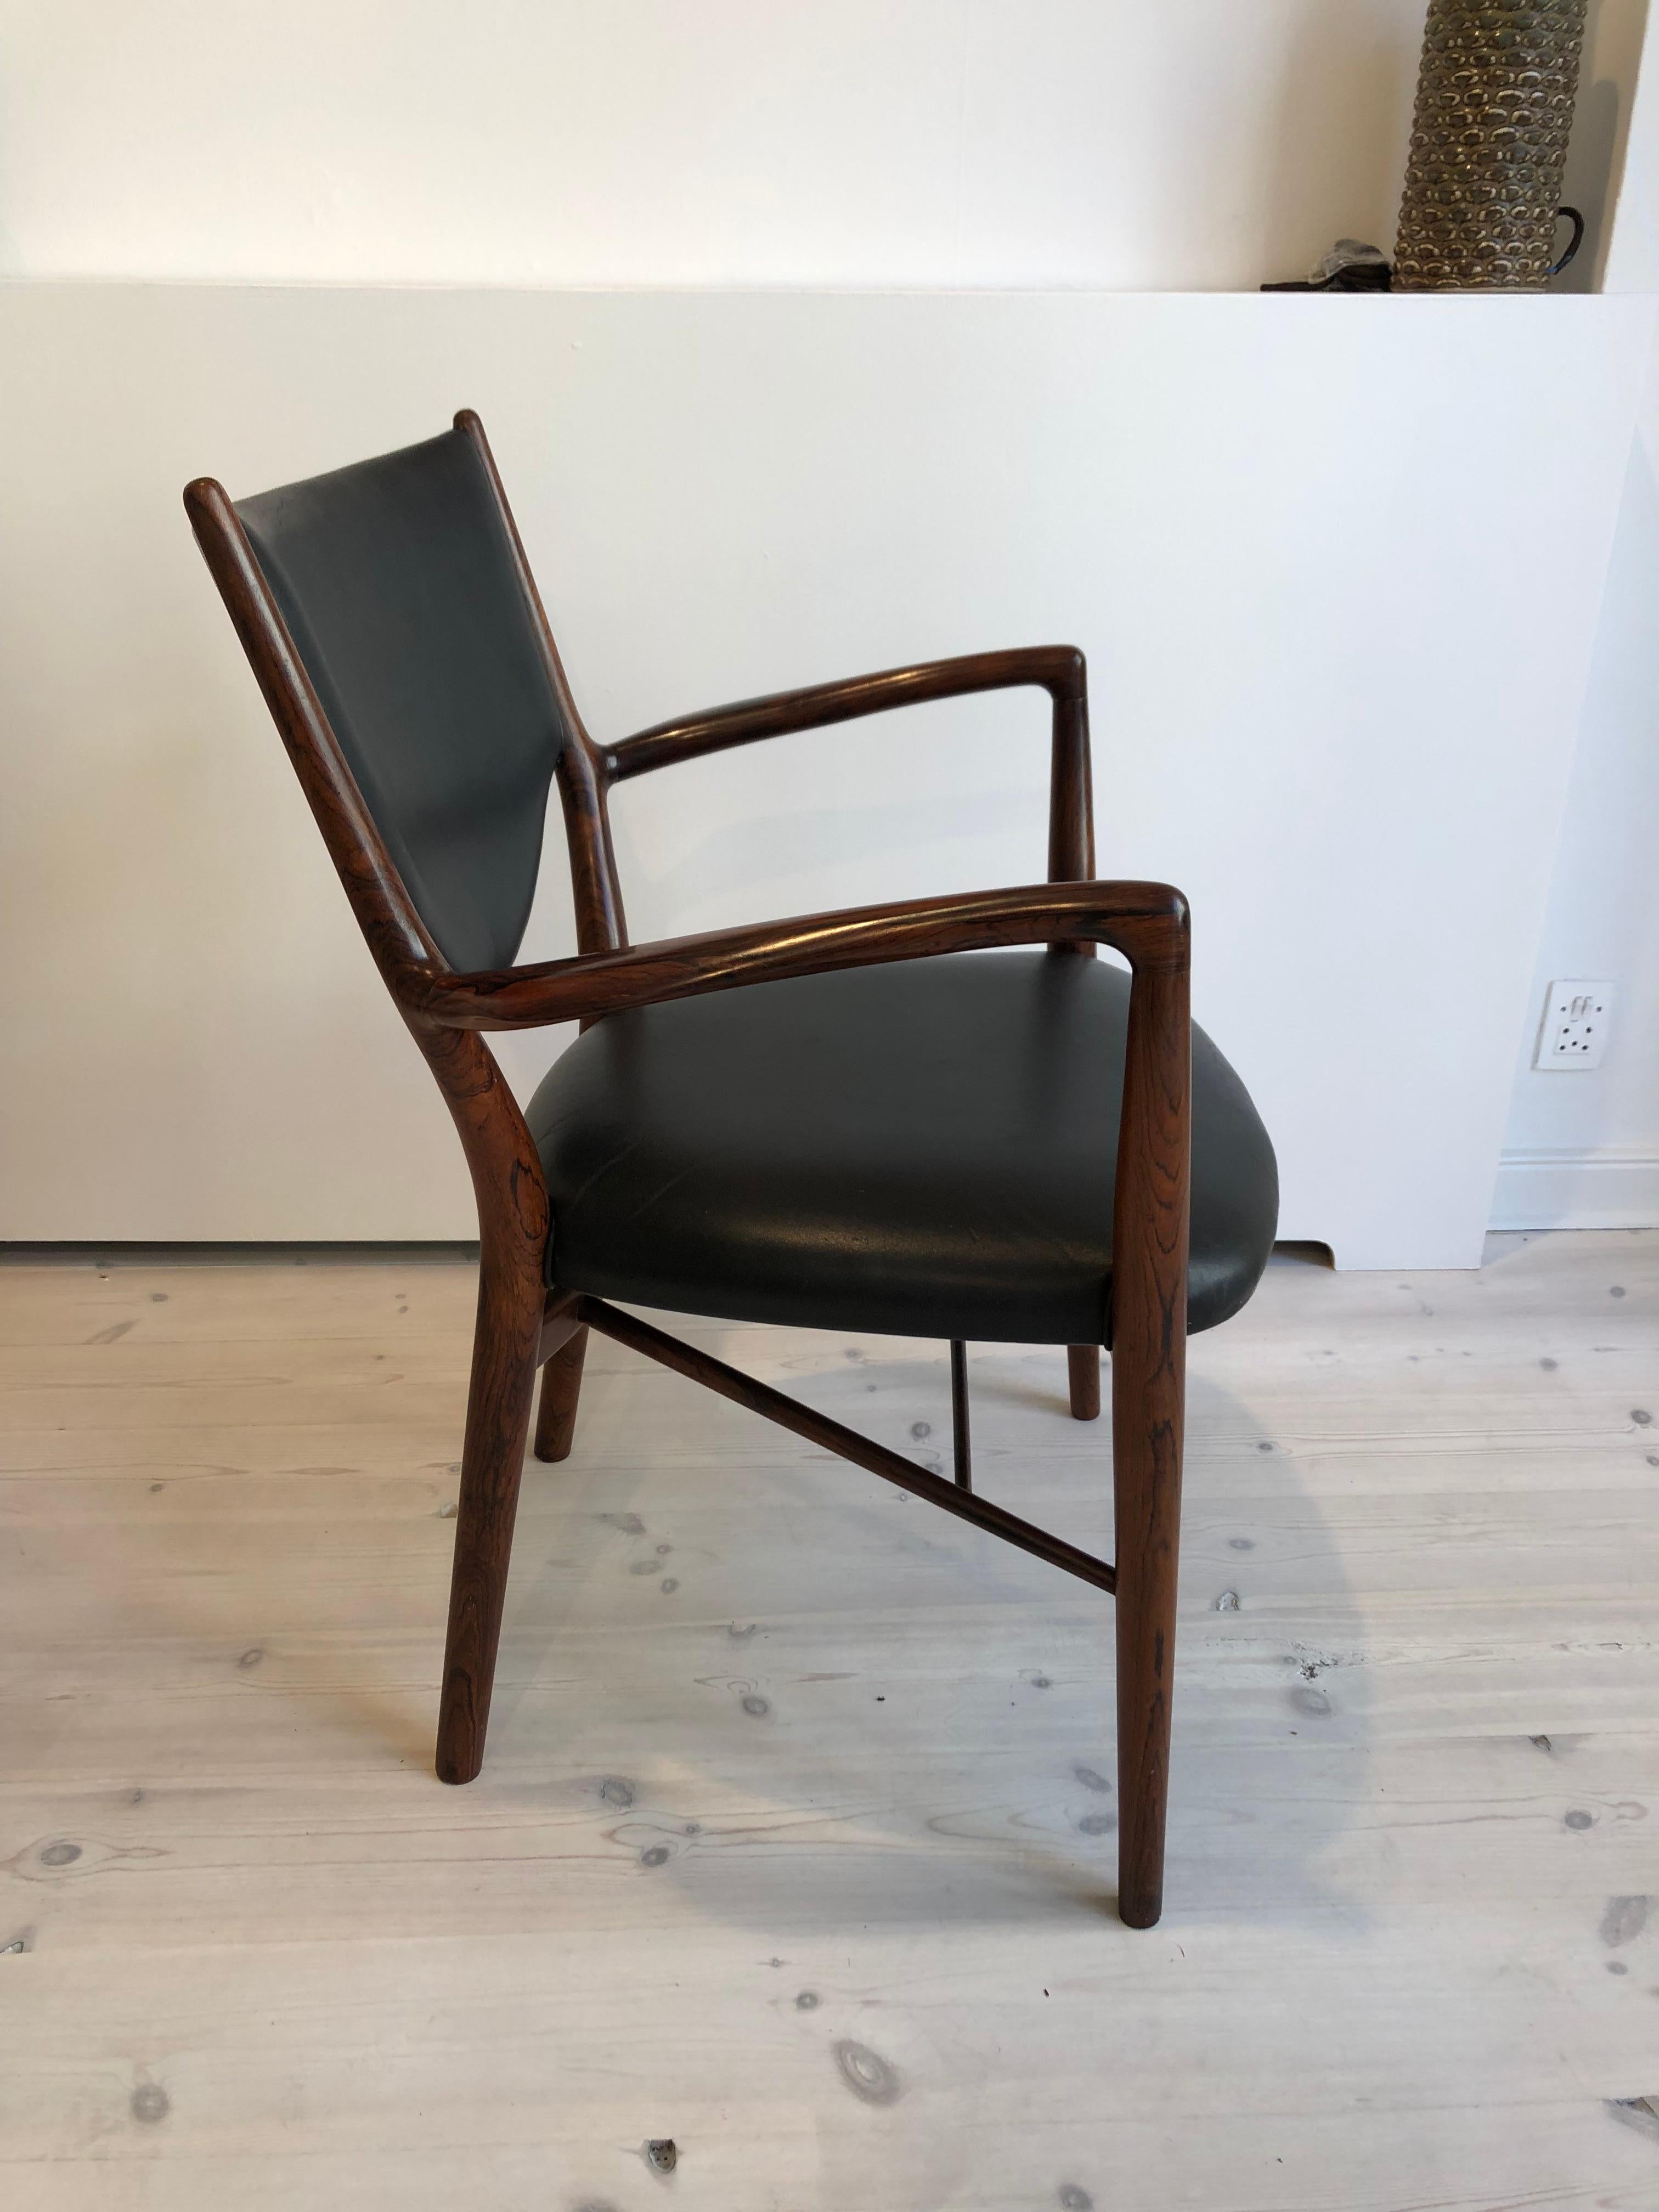 Finn Juhl Pair of NV46 Armchairs in Brazilian Rosewood for Niels Vodder, 1946 For Sale 5